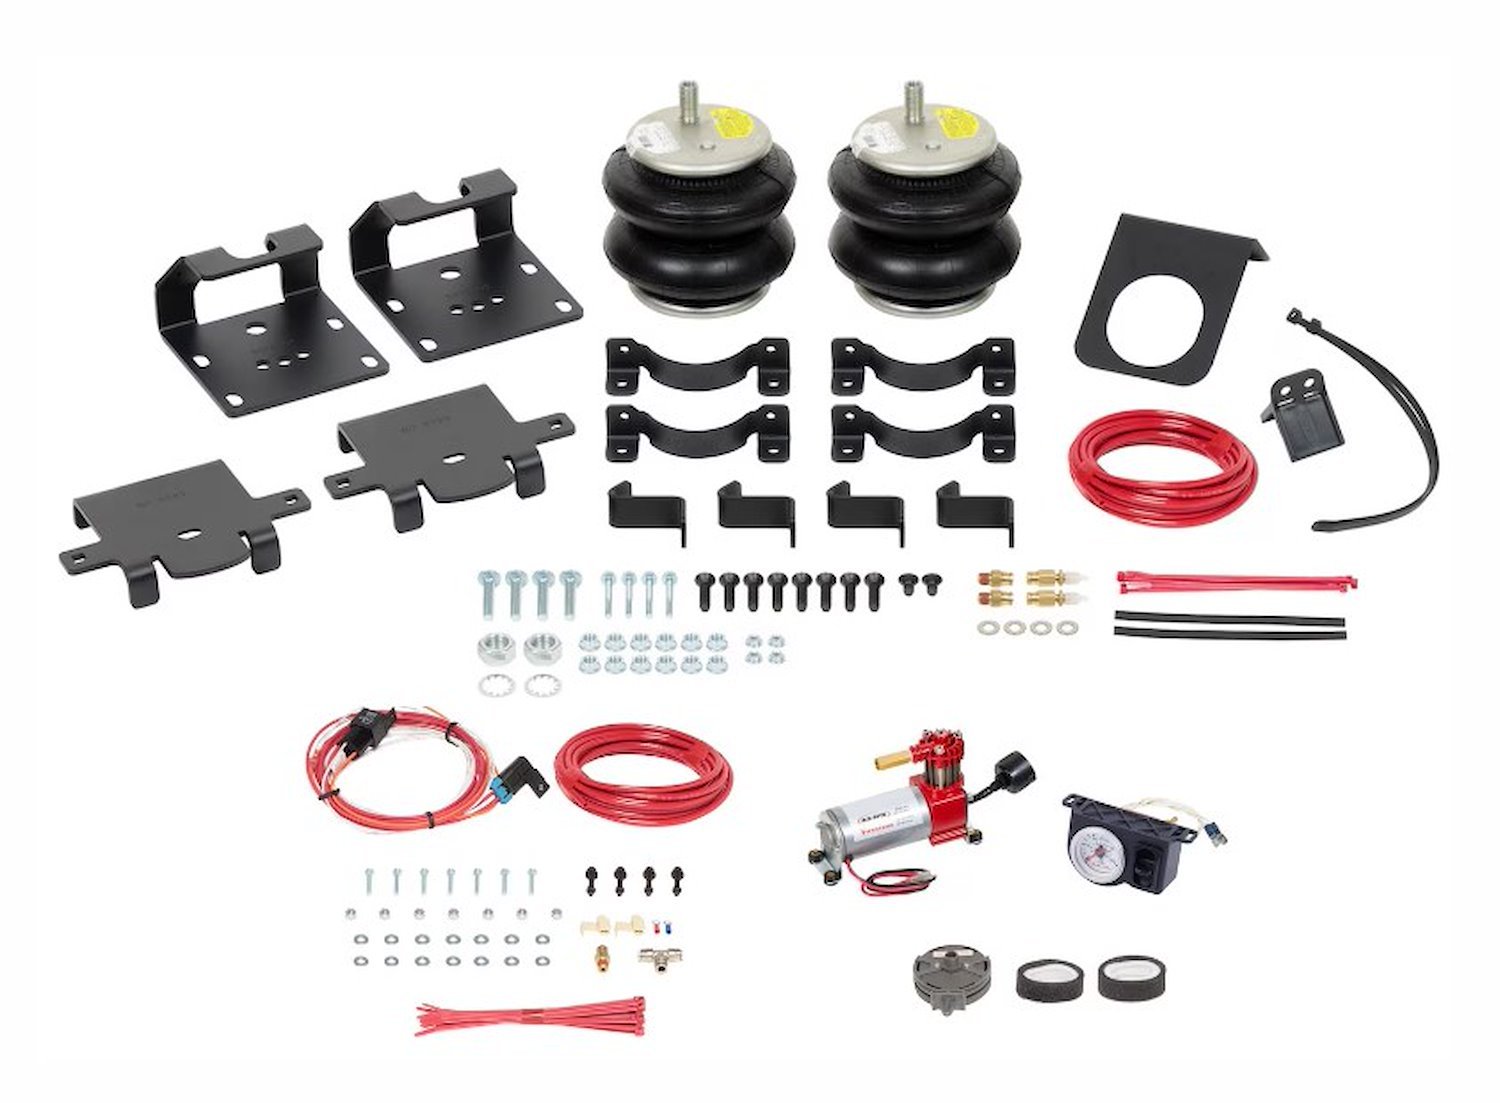 2825 Ride-Rite Analog All-In-One Spring Kit Fits Select Chevrolet Silverado/GMC Sierra 2500/3500 2WD/4WD